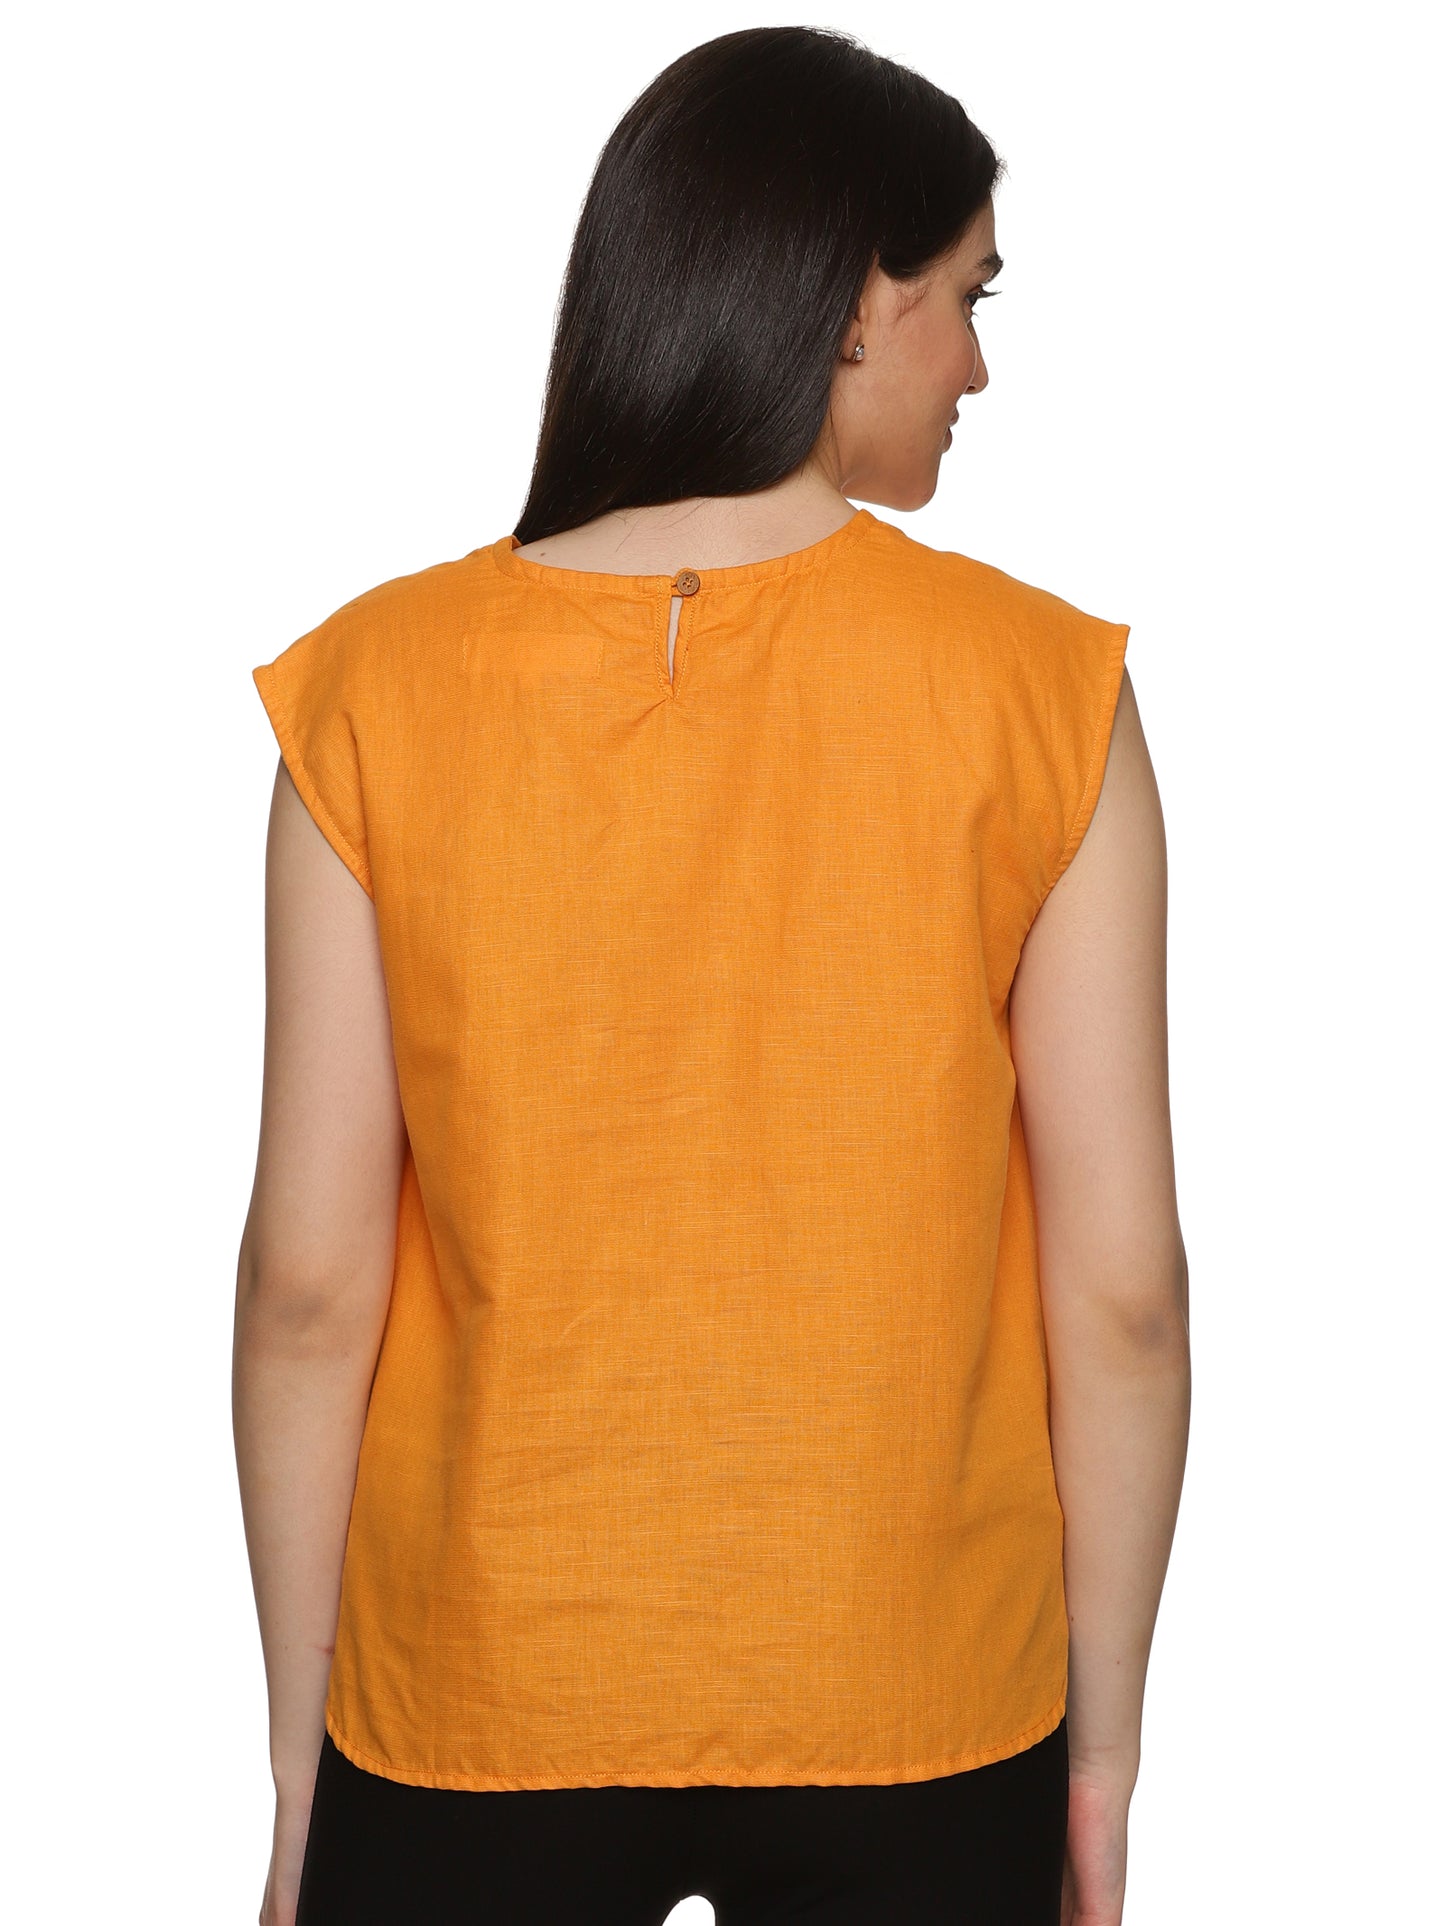 A back view of lady in Cotton Drop Shoulder Orange Top, womens workwear